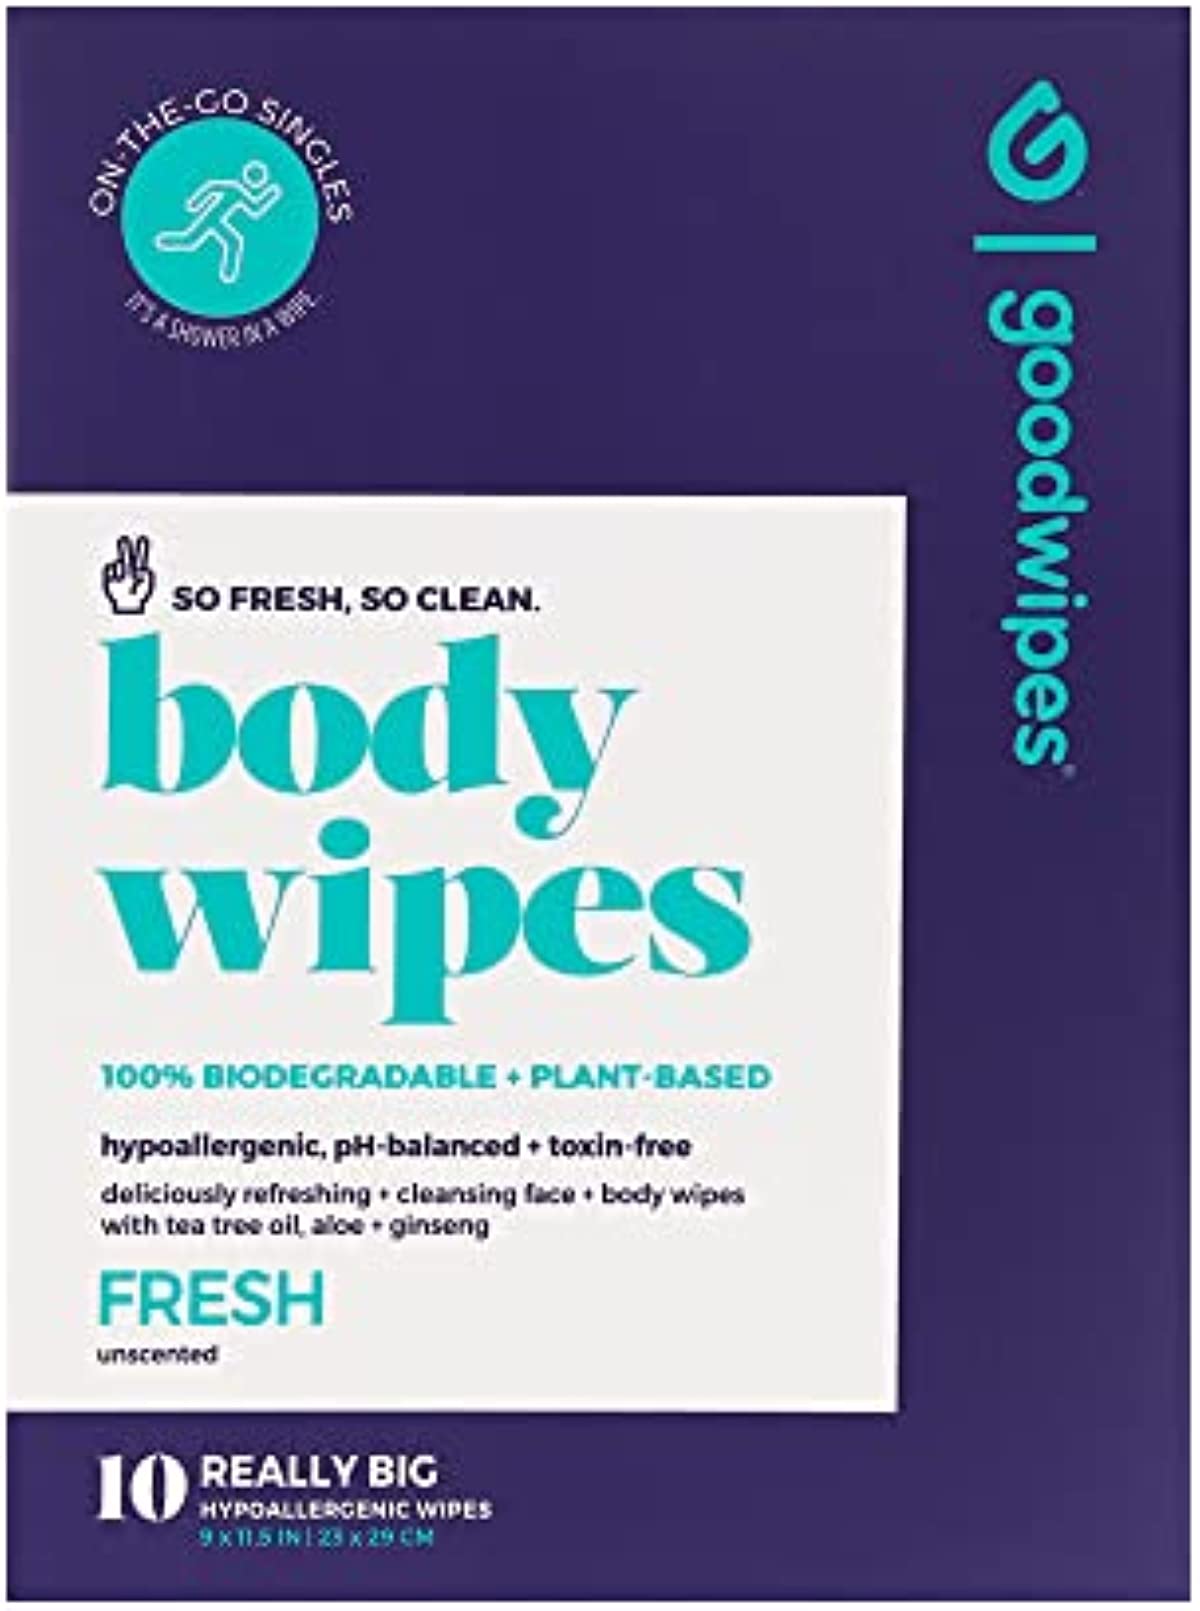 Goodwipes Really Big Body Wipes, Fresh Scent, Plant Based and Hypoallergenic, Wipe Away Sweat and Odor, for Face and Body, with Aloe and Ginseng (10 Count)